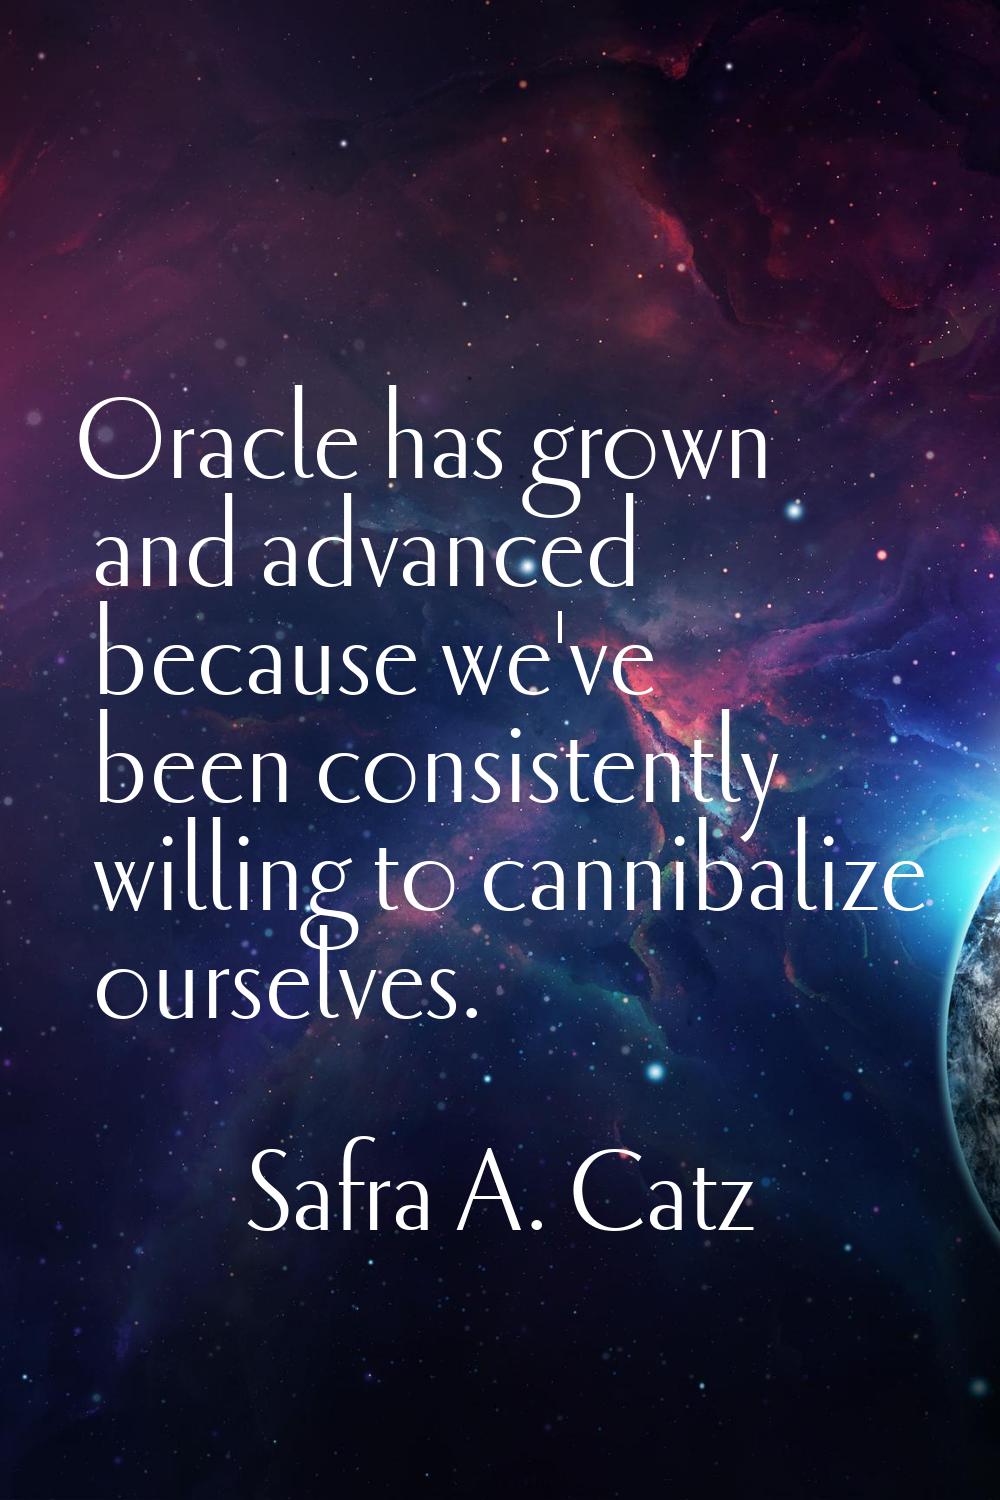 Oracle has grown and advanced because we've been consistently willing to cannibalize ourselves.